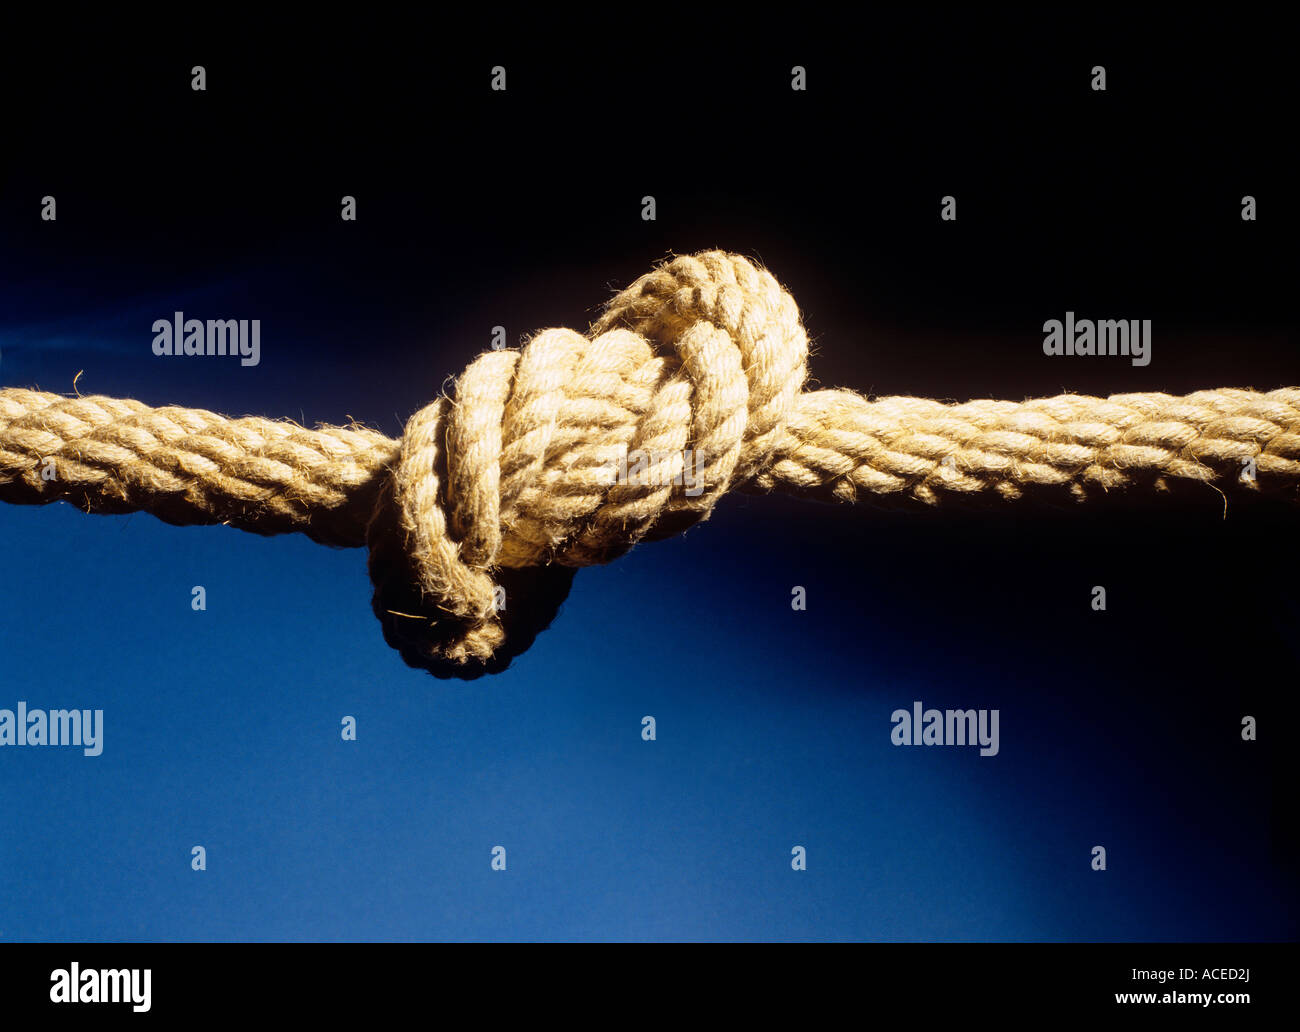 knot in rope Stock Photo